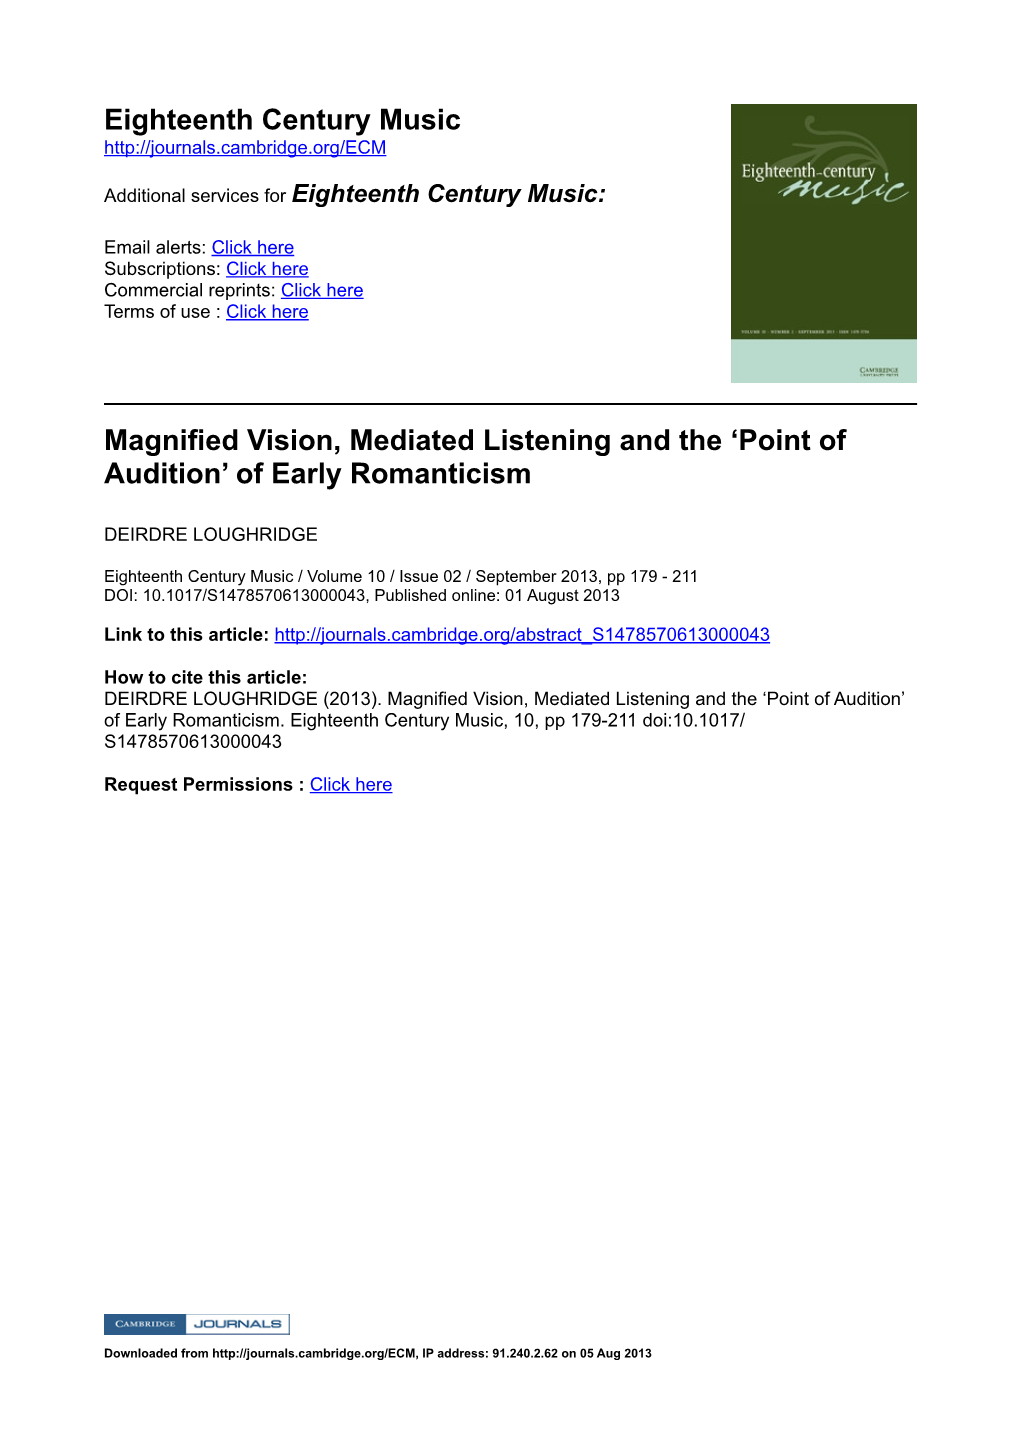 Eighteenth Century Music Magnified Vision, Mediated